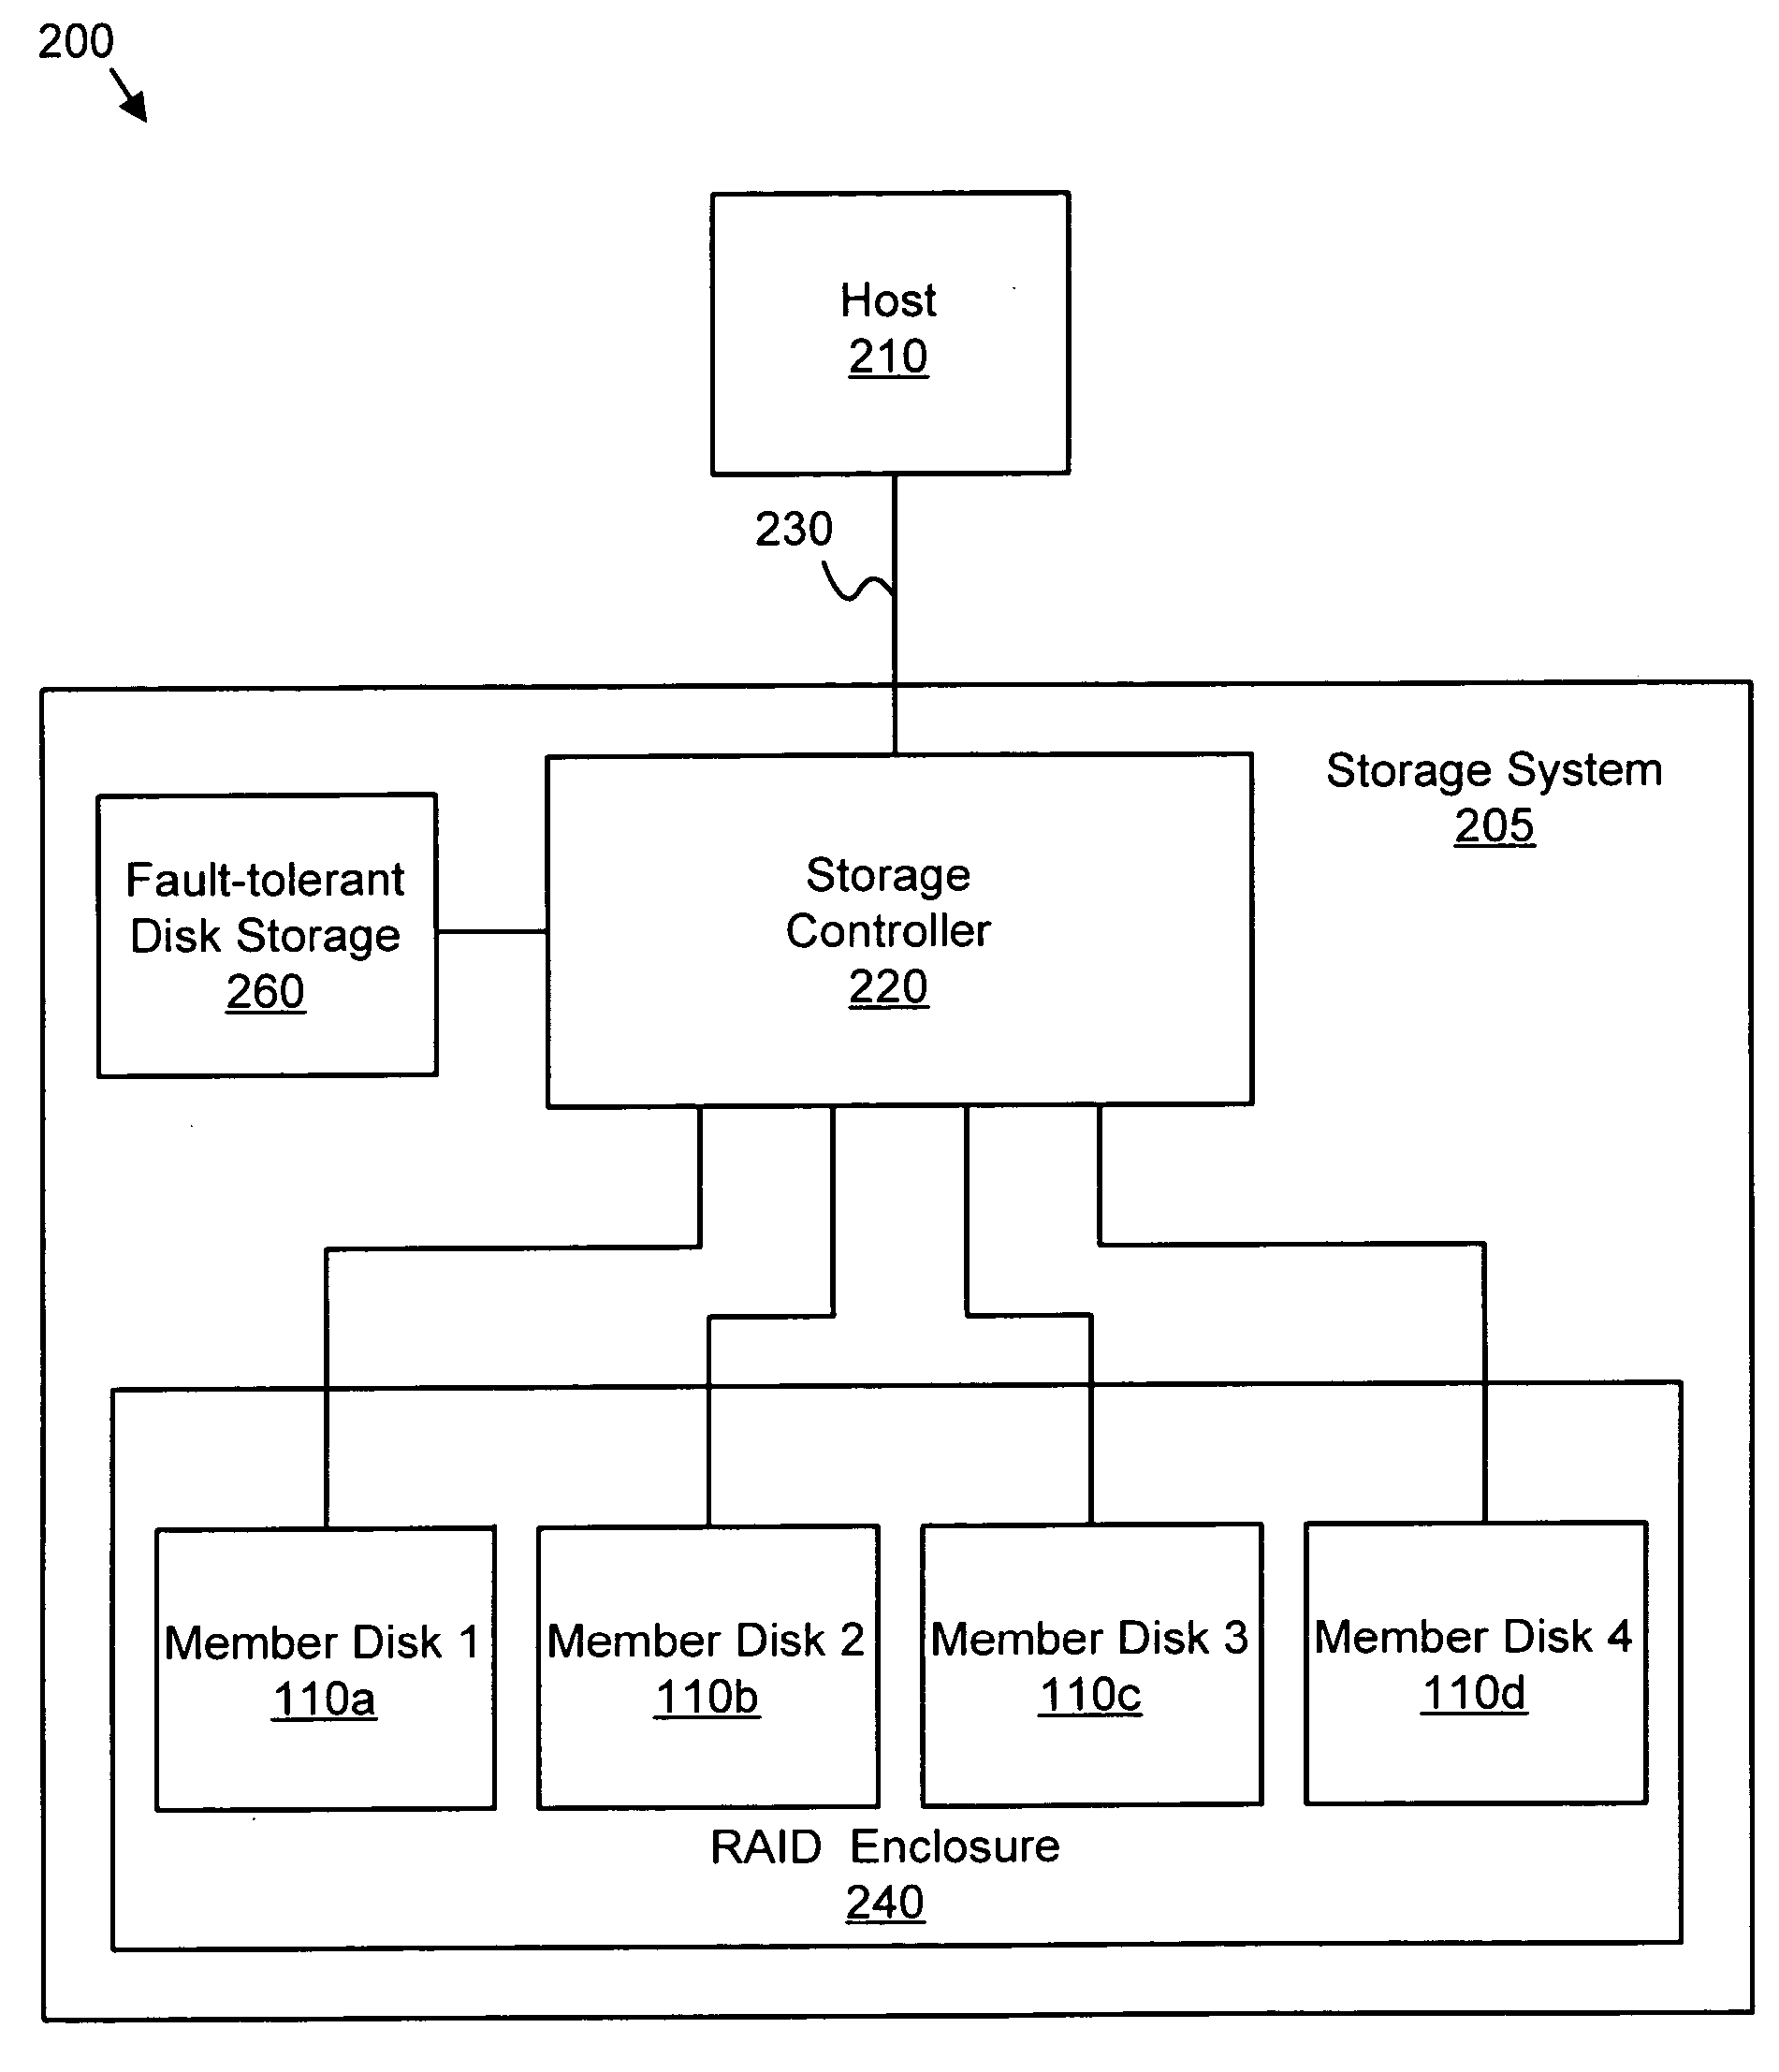 Apparatus, system, and method for differential rebuilding of a reactivated offline RAID member disk